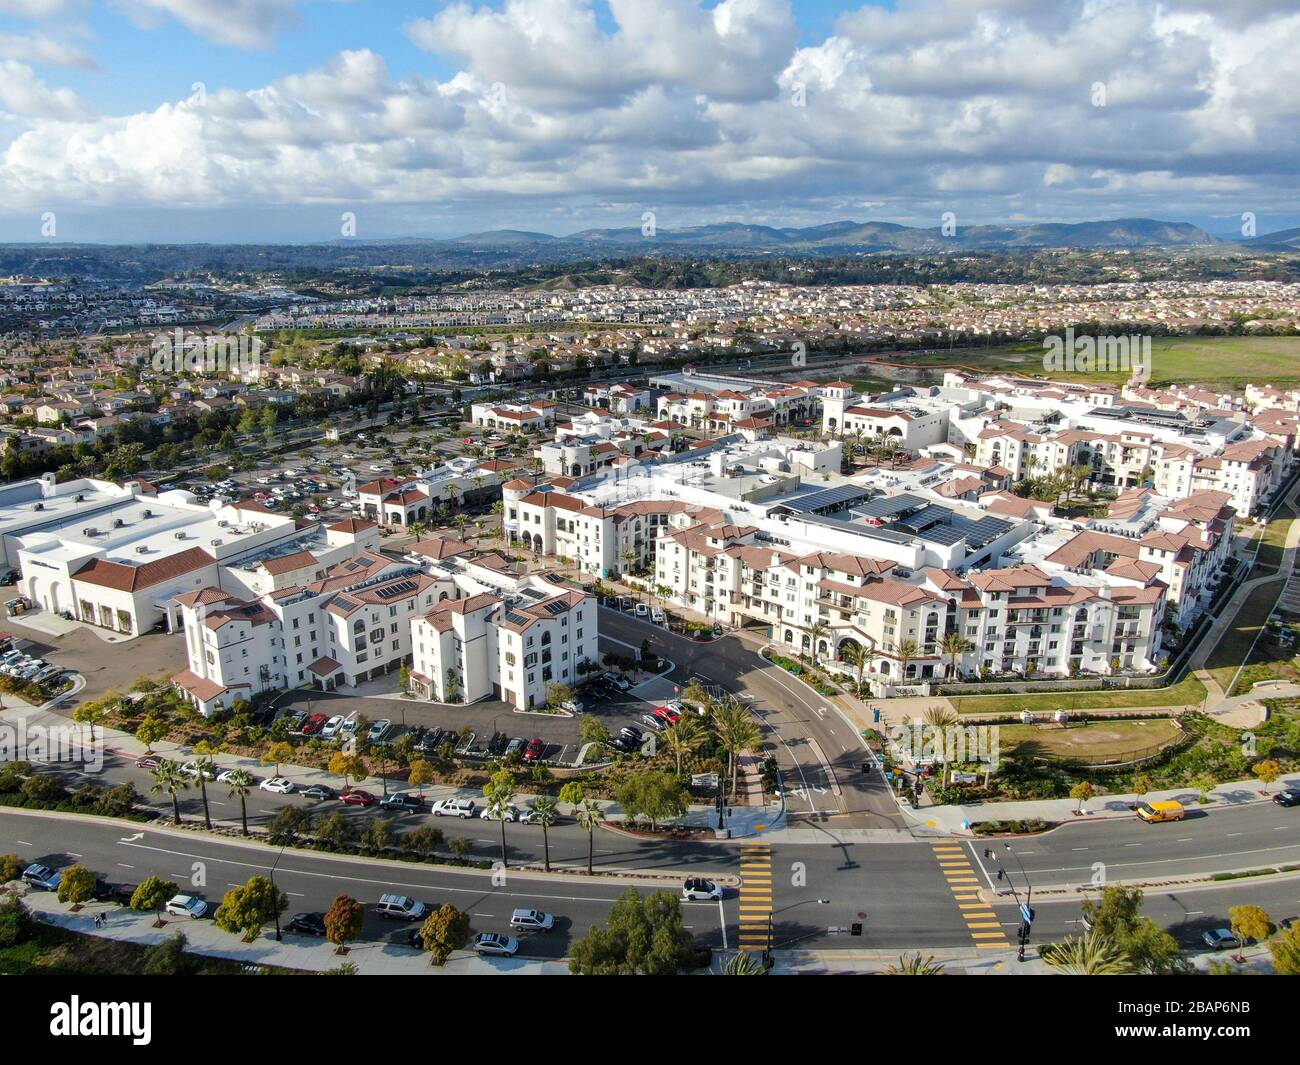 Aerial view of typical small town shopping center with parking . Carmel Valley, San Diego, California, USA. March 28th, 2020 Stock Photo